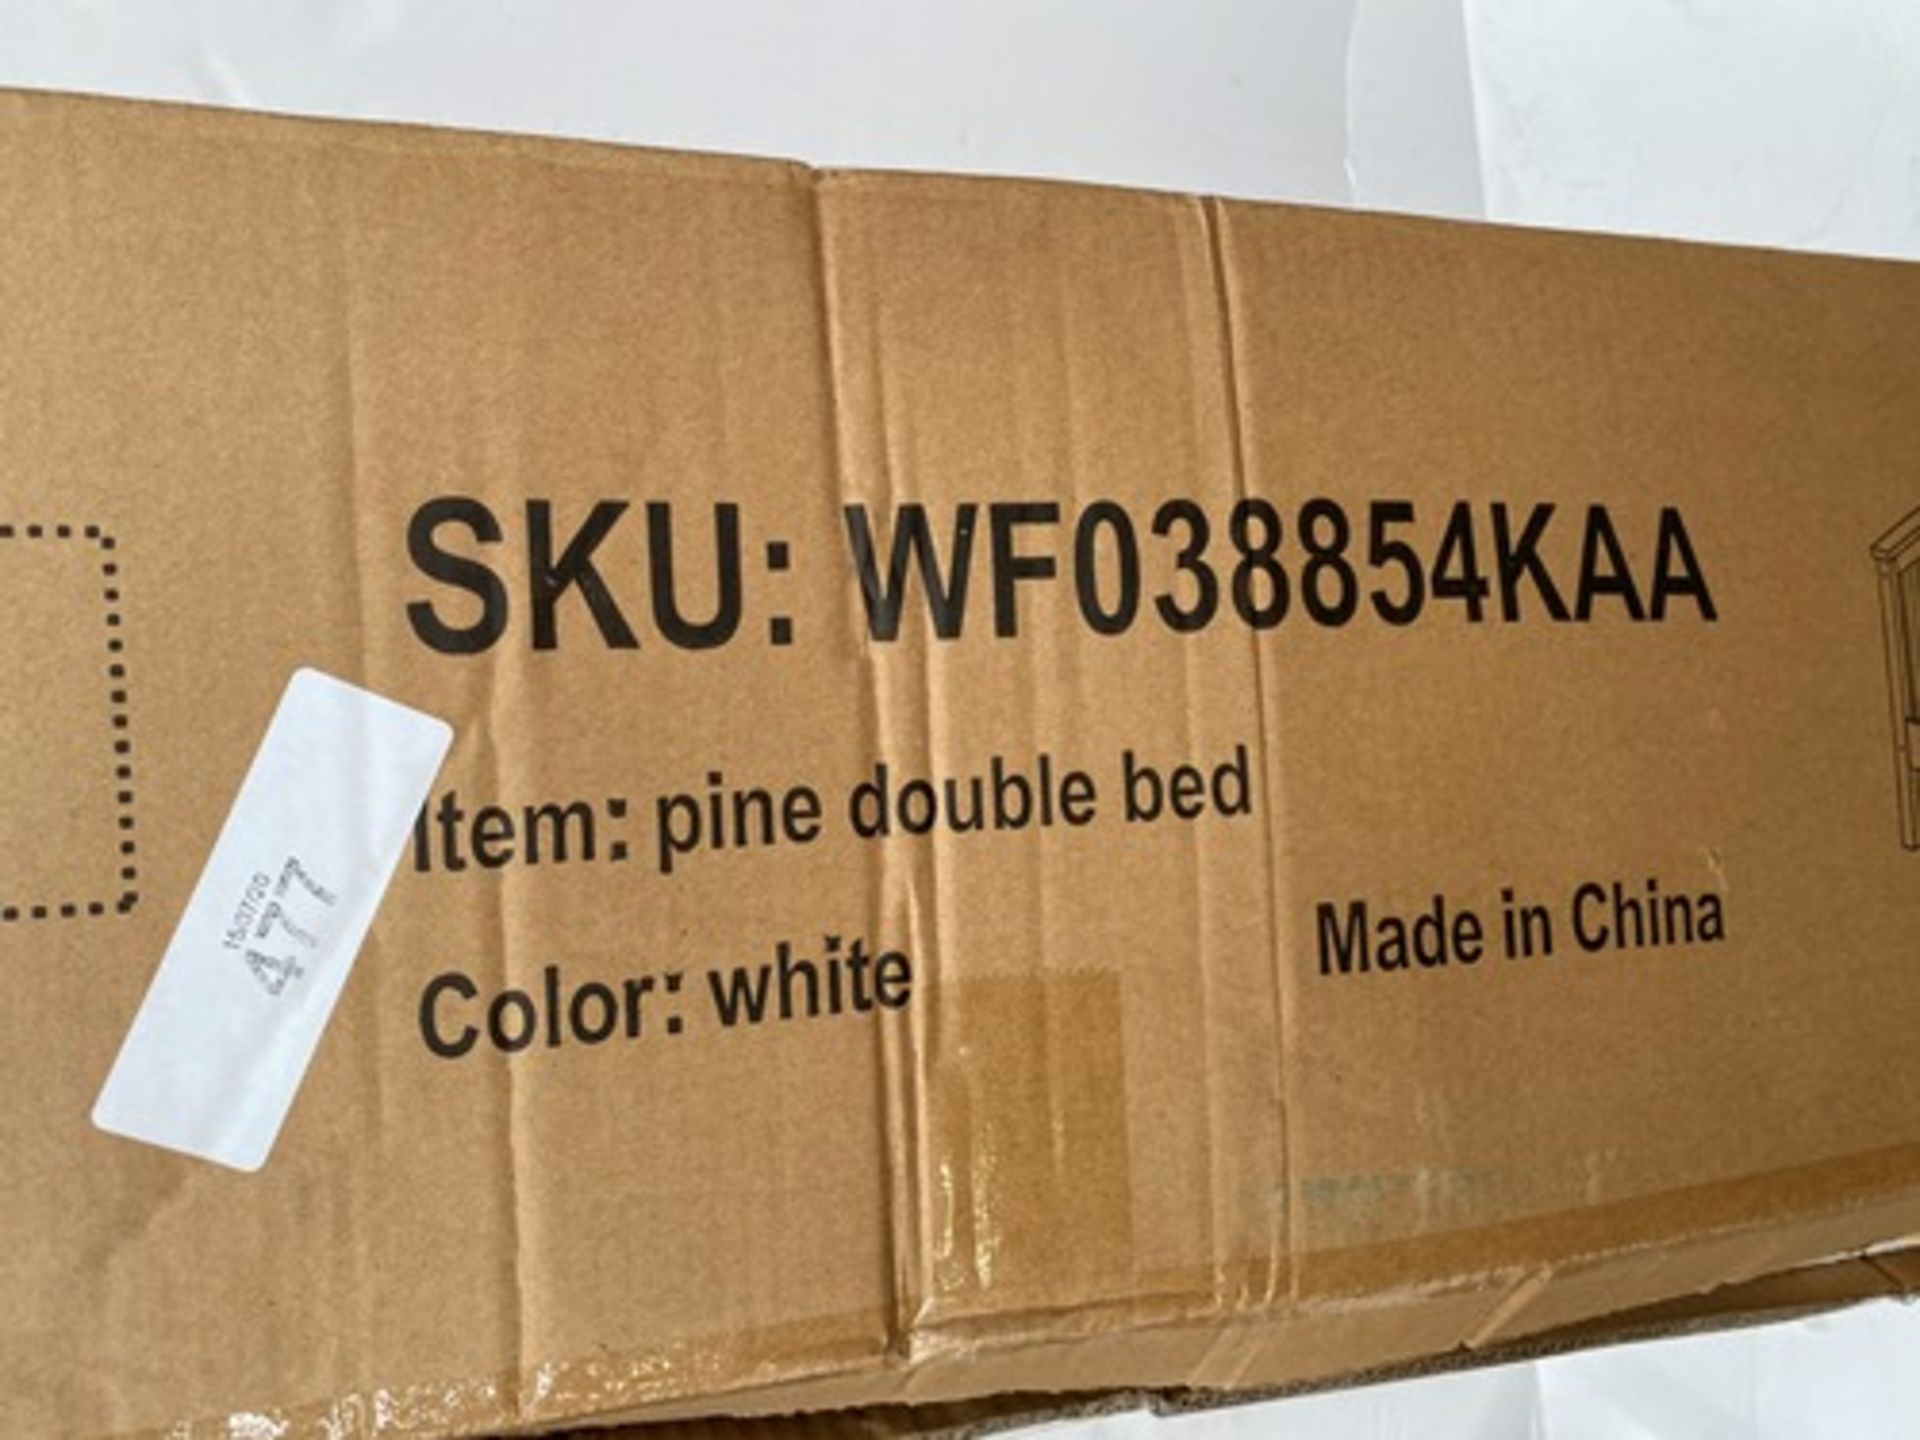 White pine double bed, SKU: WF038854KAA - New (GS11) - Image 2 of 3